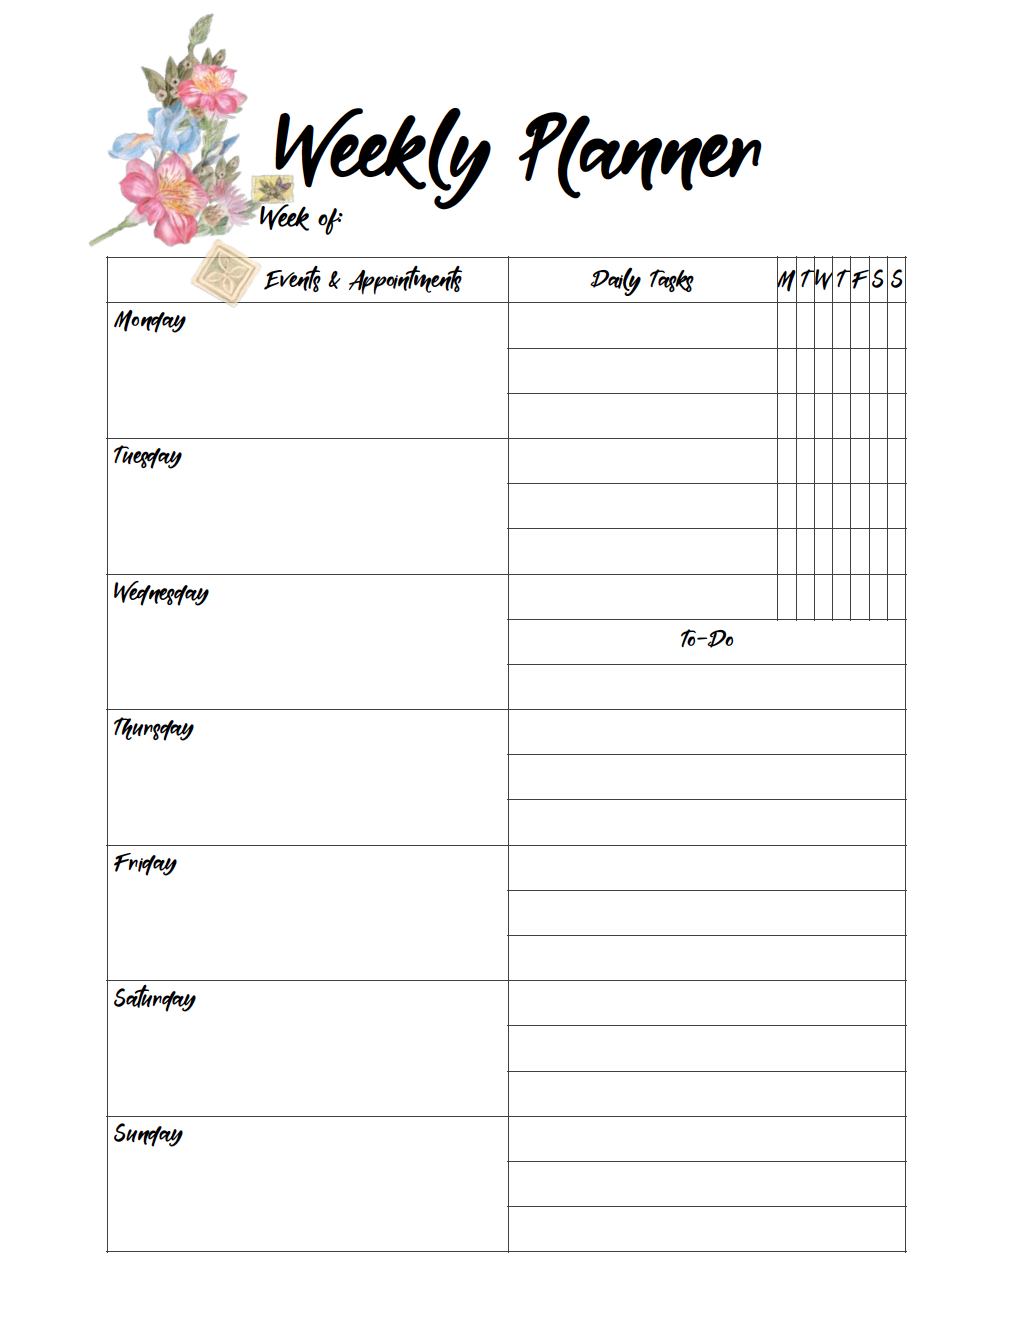 Free Printable Weekly Planners: Monday Start - Free Printable Weekly Planner